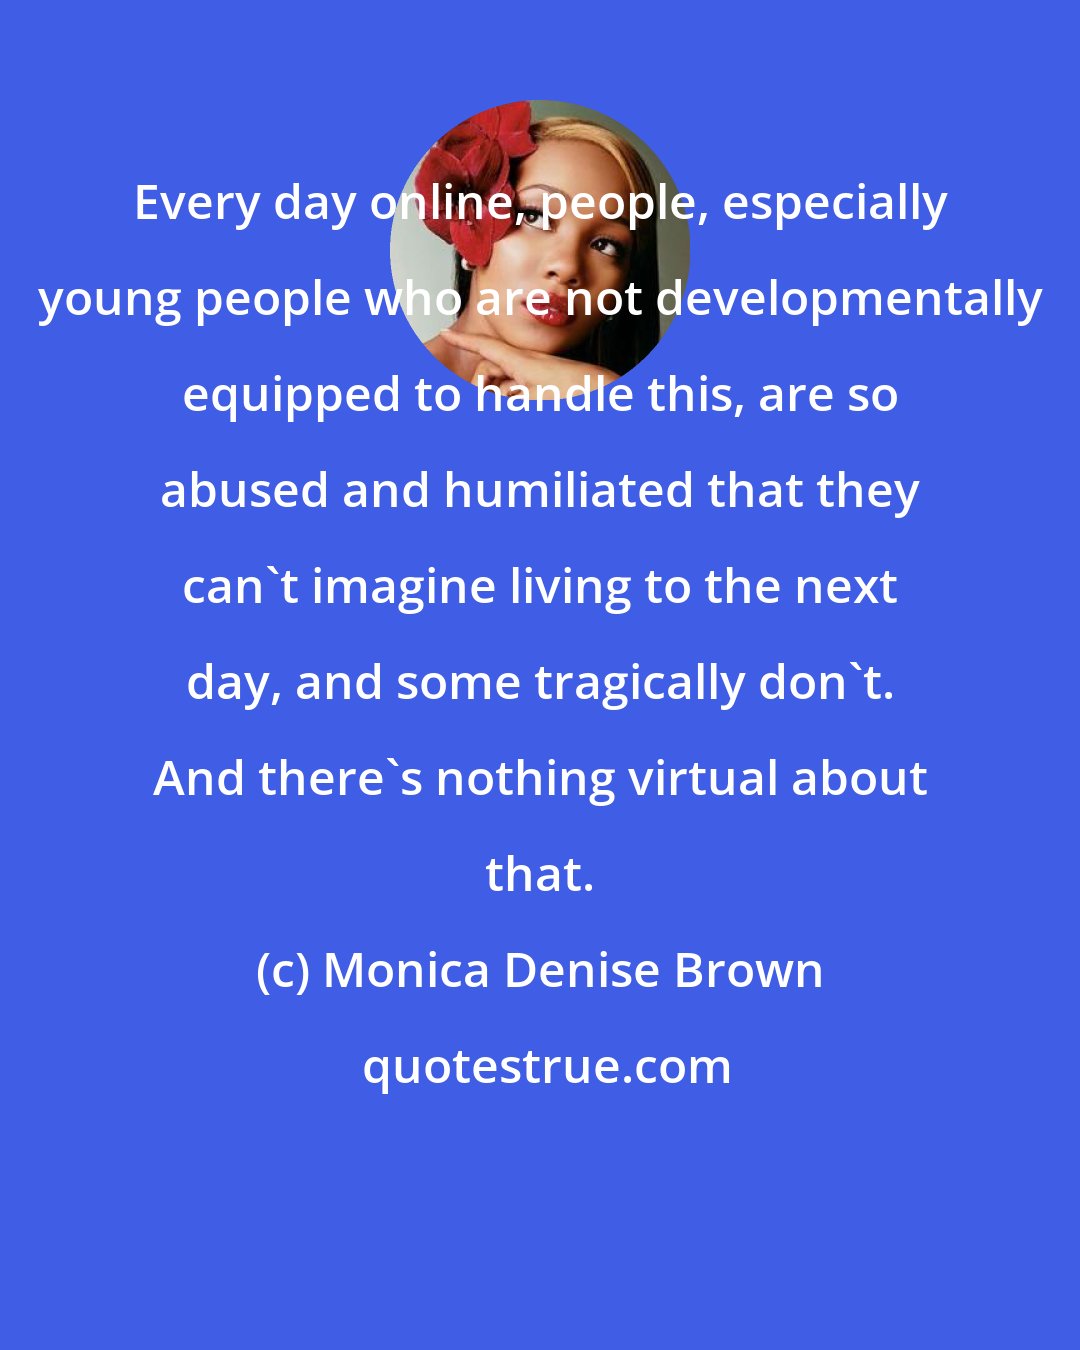 Monica Denise Brown: Every day online, people, especially young people who are not developmentally equipped to handle this, are so abused and humiliated that they can't imagine living to the next day, and some tragically don't. And there's nothing virtual about that.